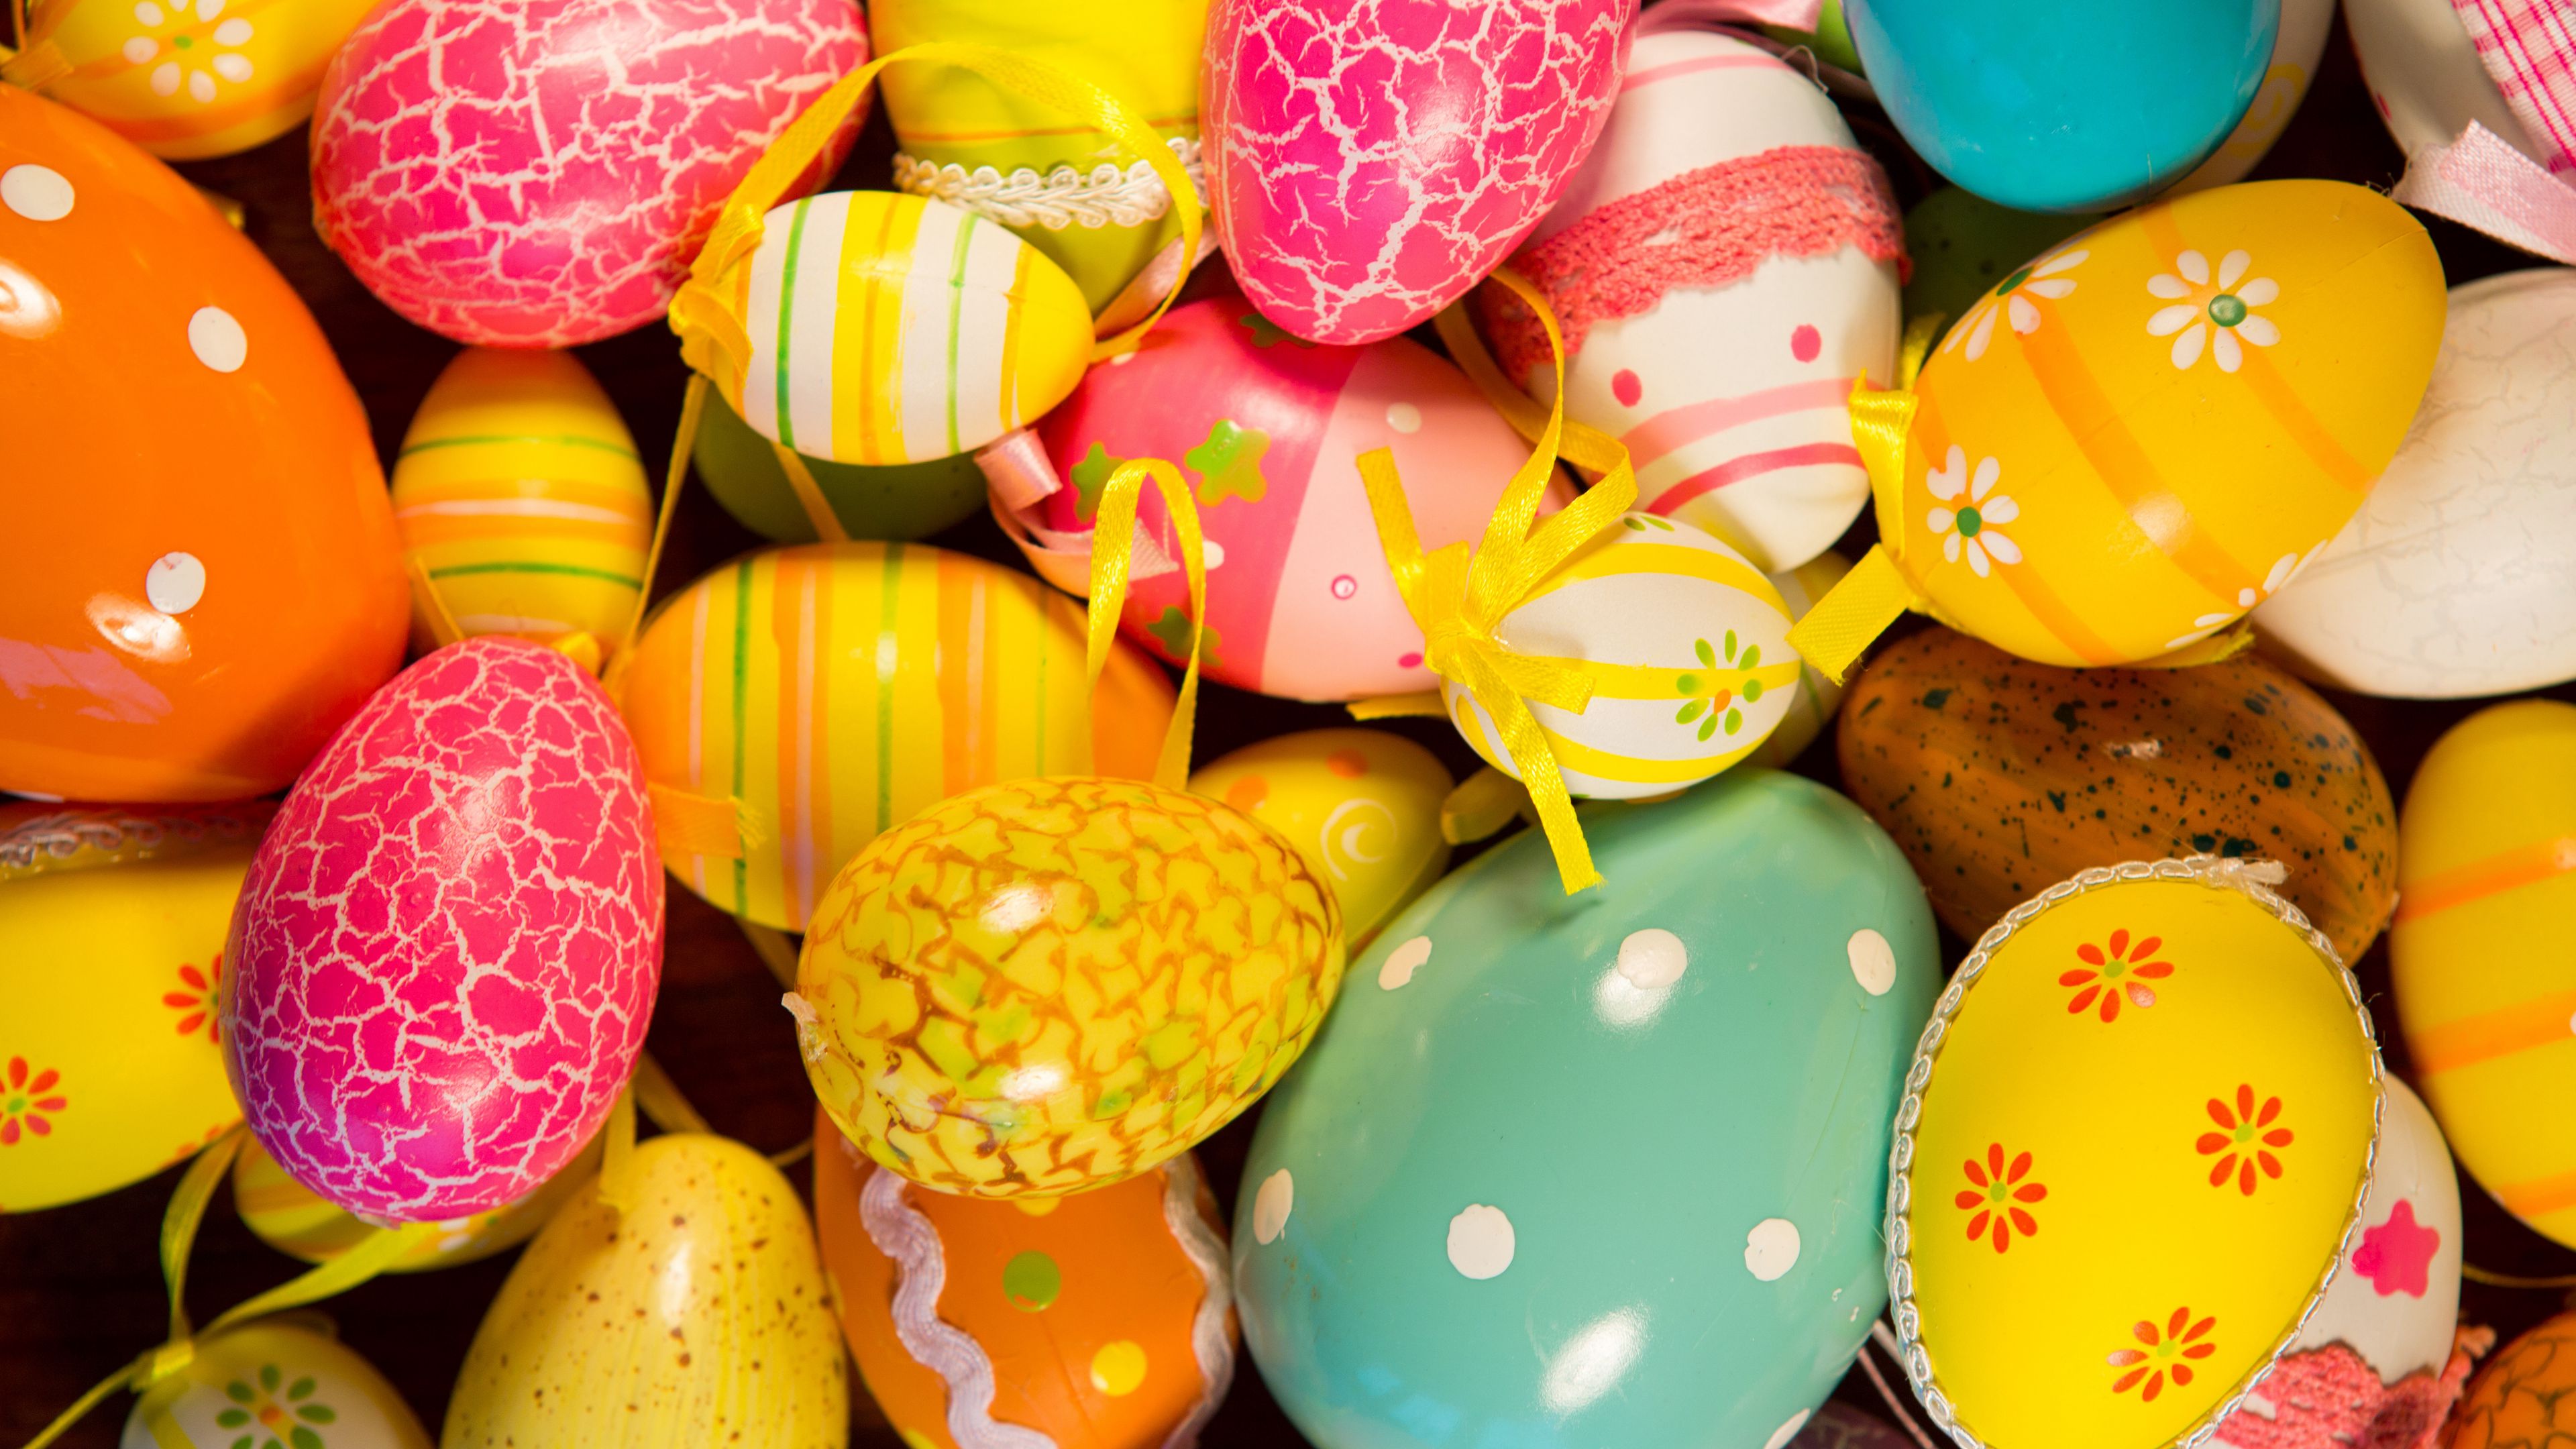 Download wallpaper 3840x2160 easter eggs, easter, painted eggs, holiday 4k uhd 16:9 HD background